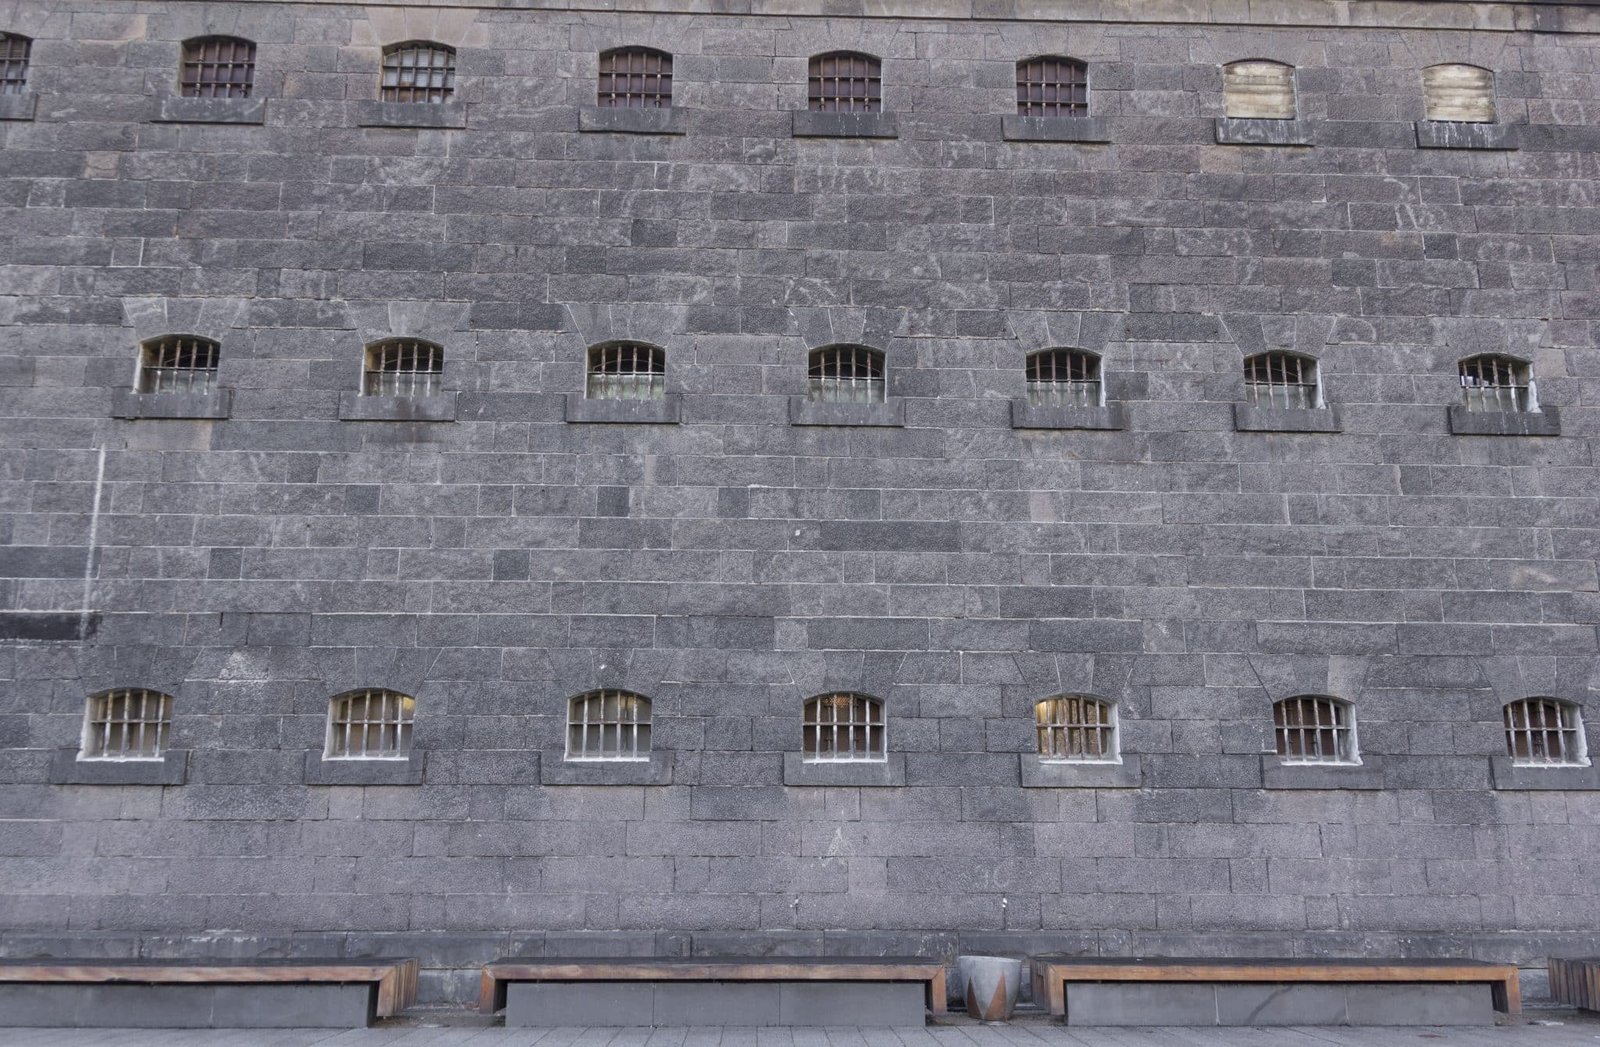 Jail windows from the outside